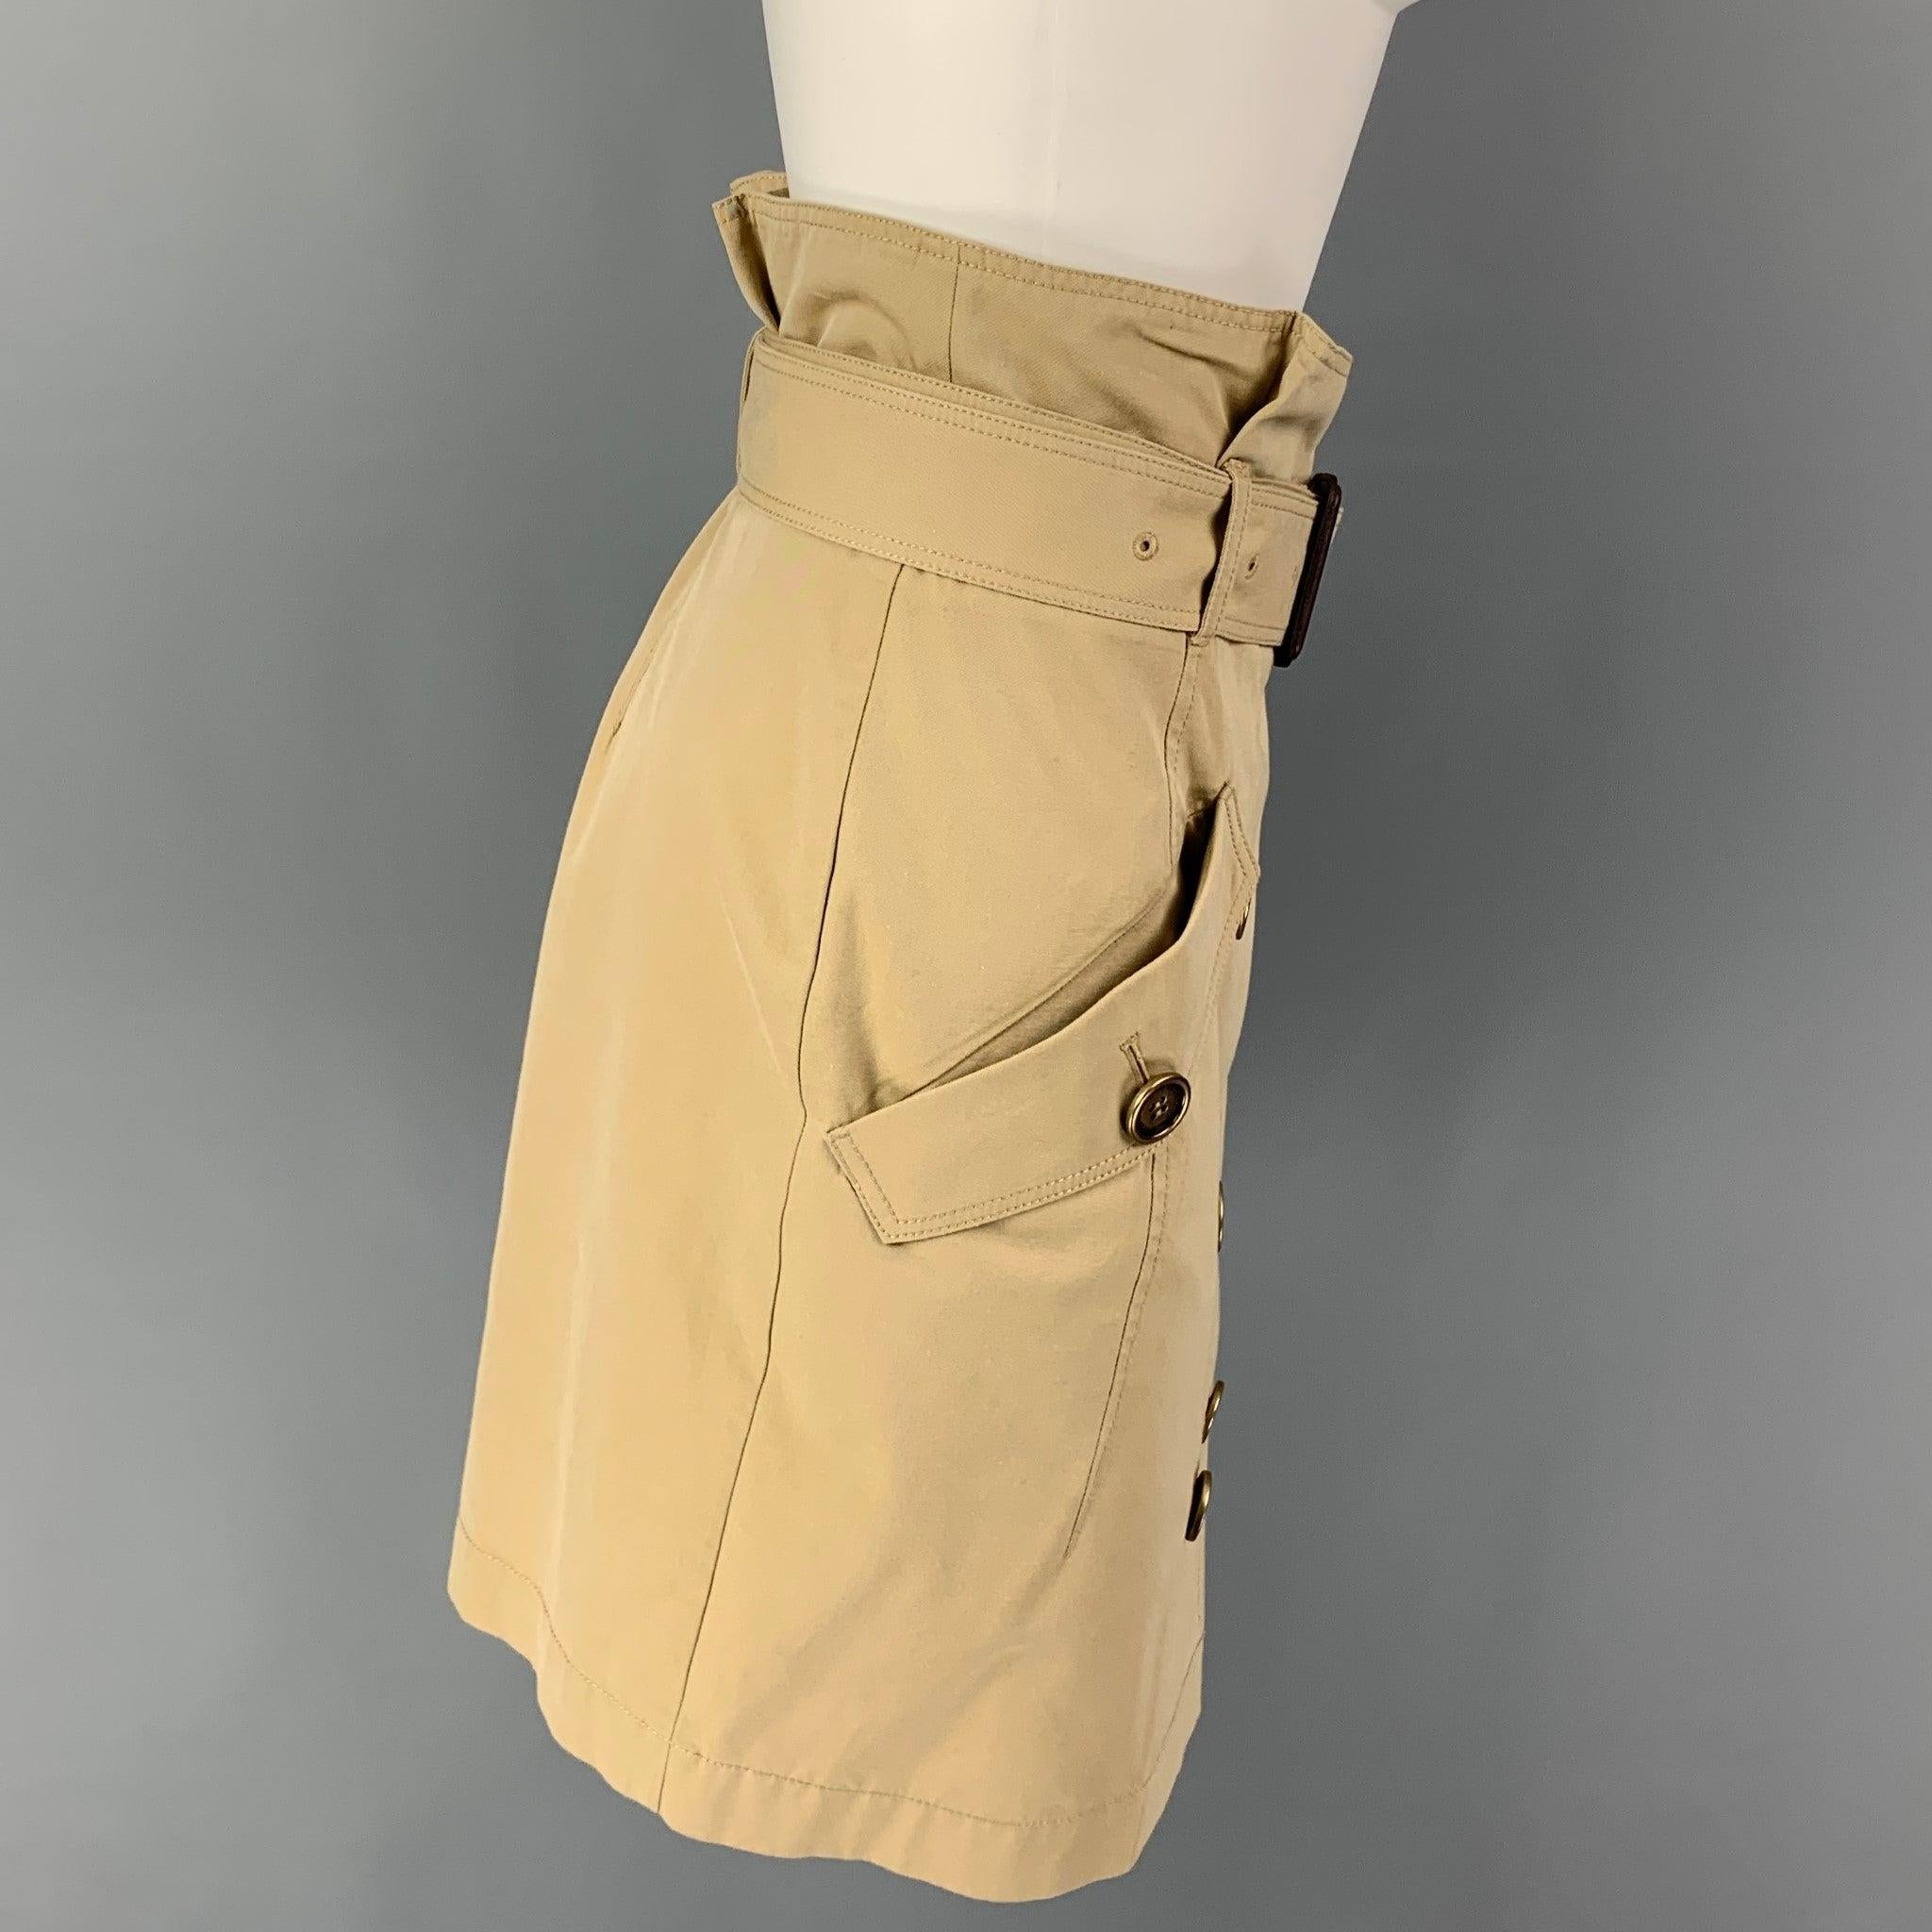 BURBERRY BRIT skirt comes in a khaki cotton featuring a belted style, flap pockets, and a double breasted closure.
Very Good
Pre-Owned Condition. 

Marked:   UK 8 / USA 6 / IT 40 / GER 36 

Measurements: 
  Waist: 30 inches  Hip: 36 inches  Length: